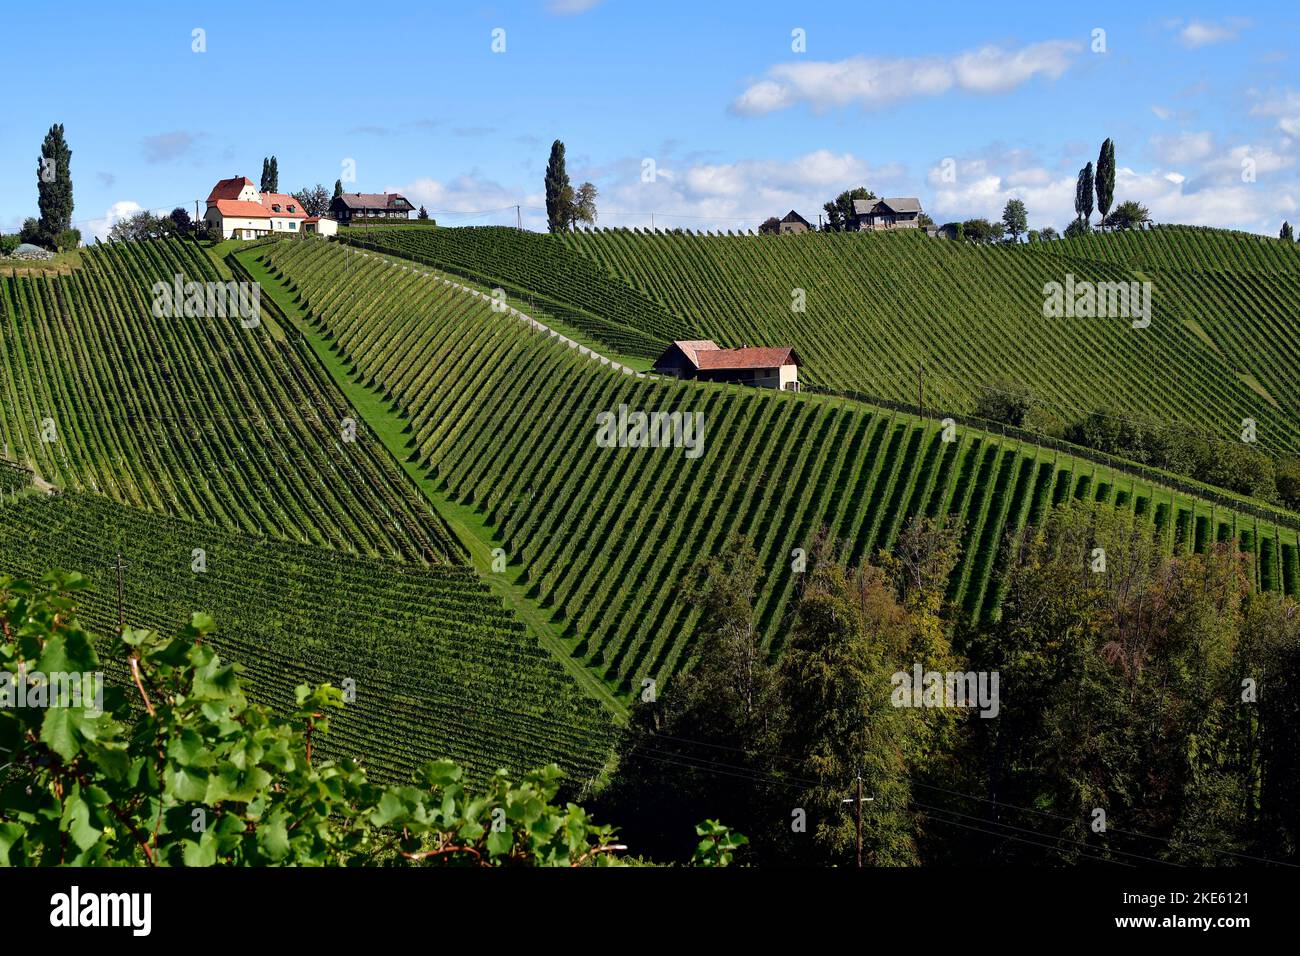 Austria, vineyards on the steep slopes of the Sulm Valley located on the Styrian wine route near the border to Slovenia, the hilly landscape is also k Stock Photo